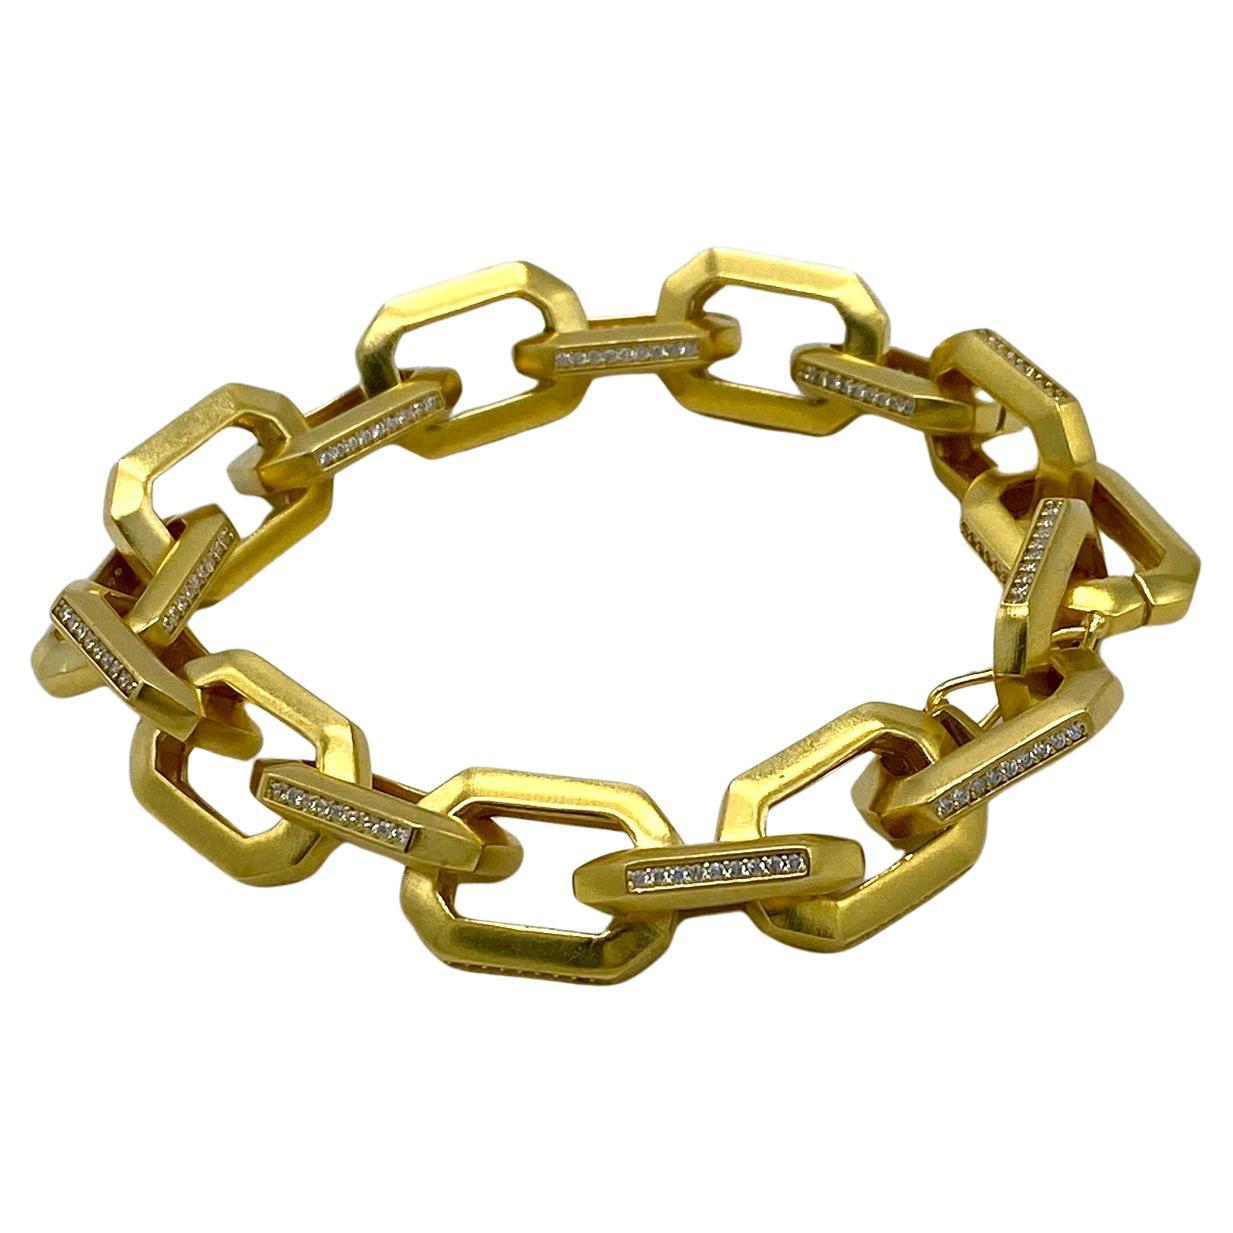 This is a new CZ on gold chain bracelet. This bracelet has heavy gold plated 0.75 x 0.5 large chain decorated with CZ on the sides of the links. It could be men's jewelry. Looks very 80s modern style. 

Our vintage jewelry collection and original